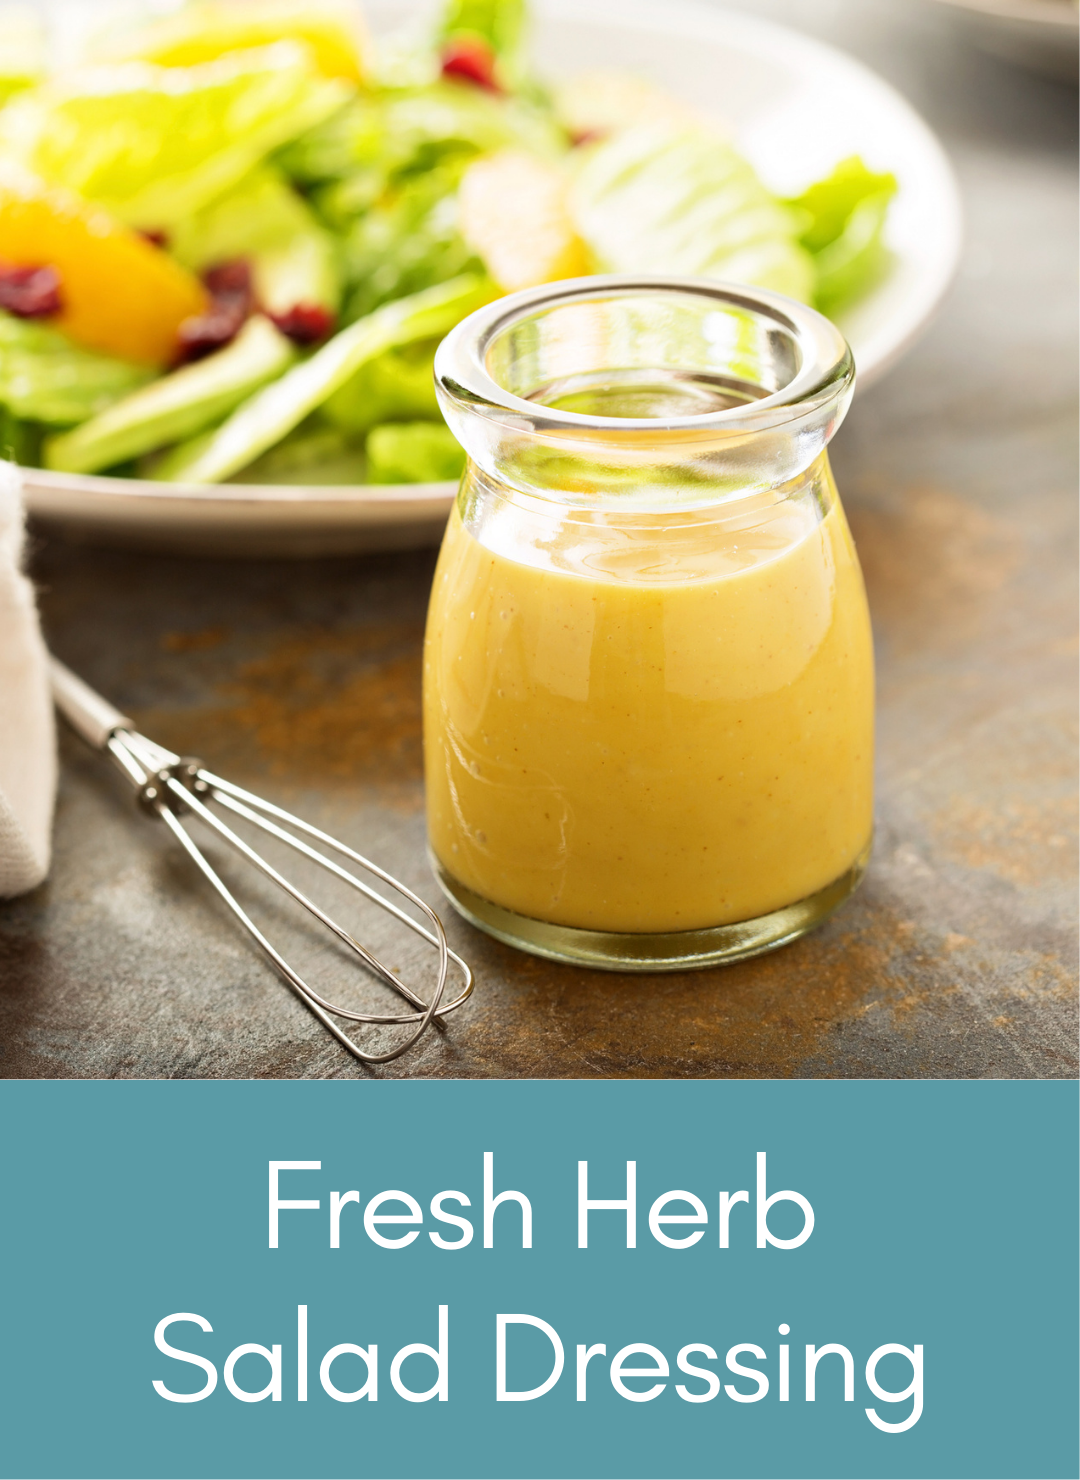 Fresh herb salad dressing Picture with link to recipe